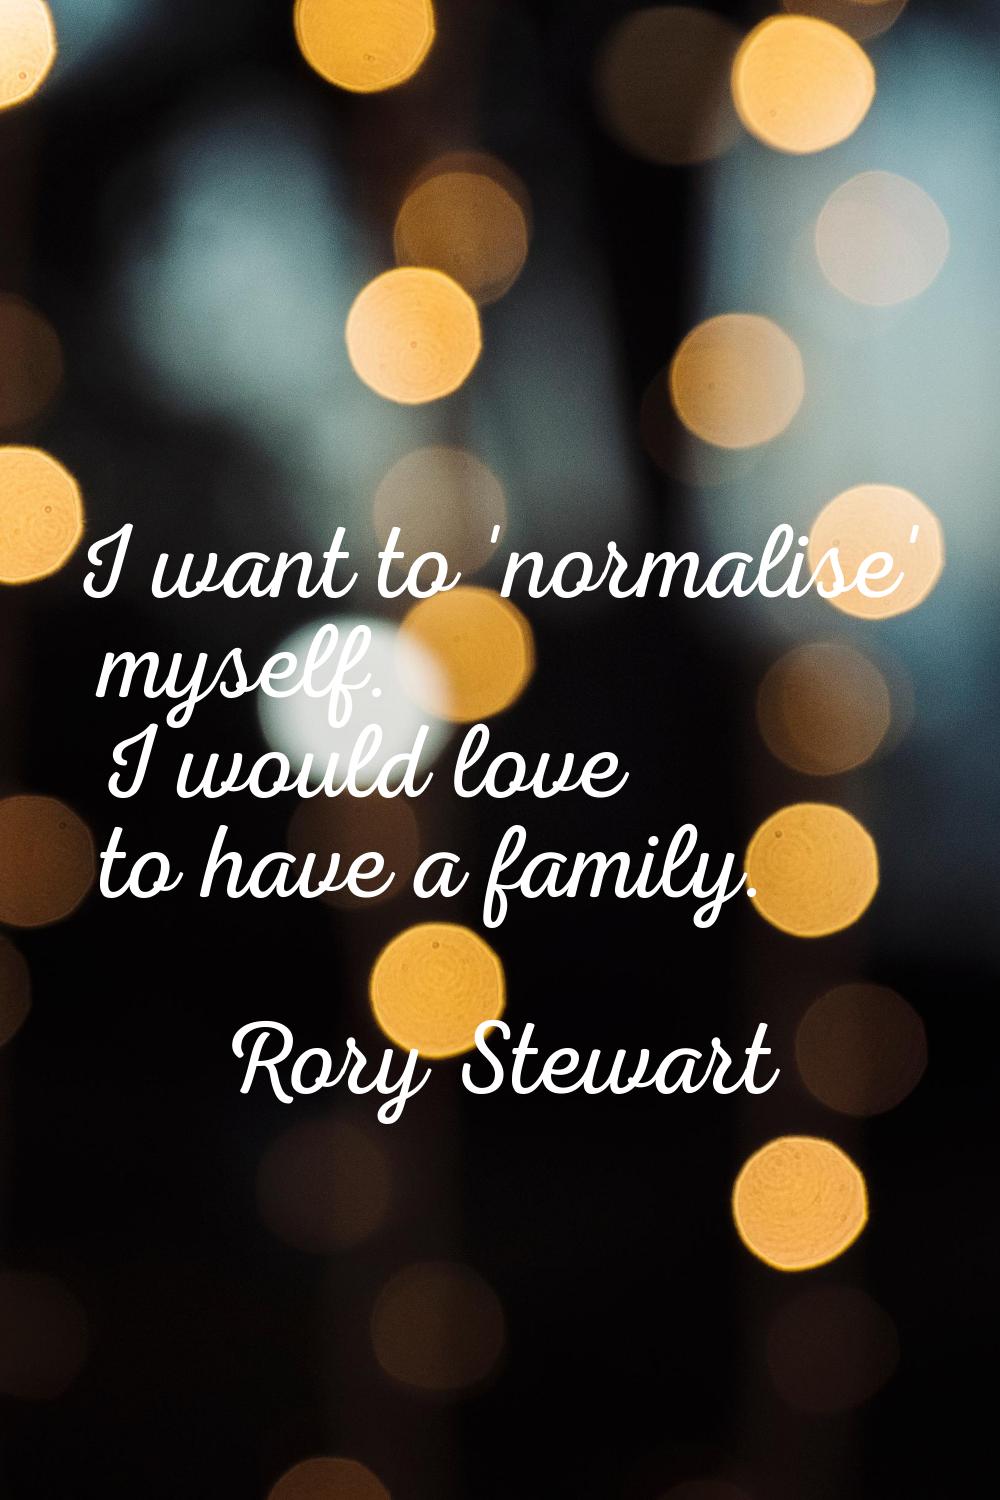 I want to 'normalise' myself. I would love to have a family.